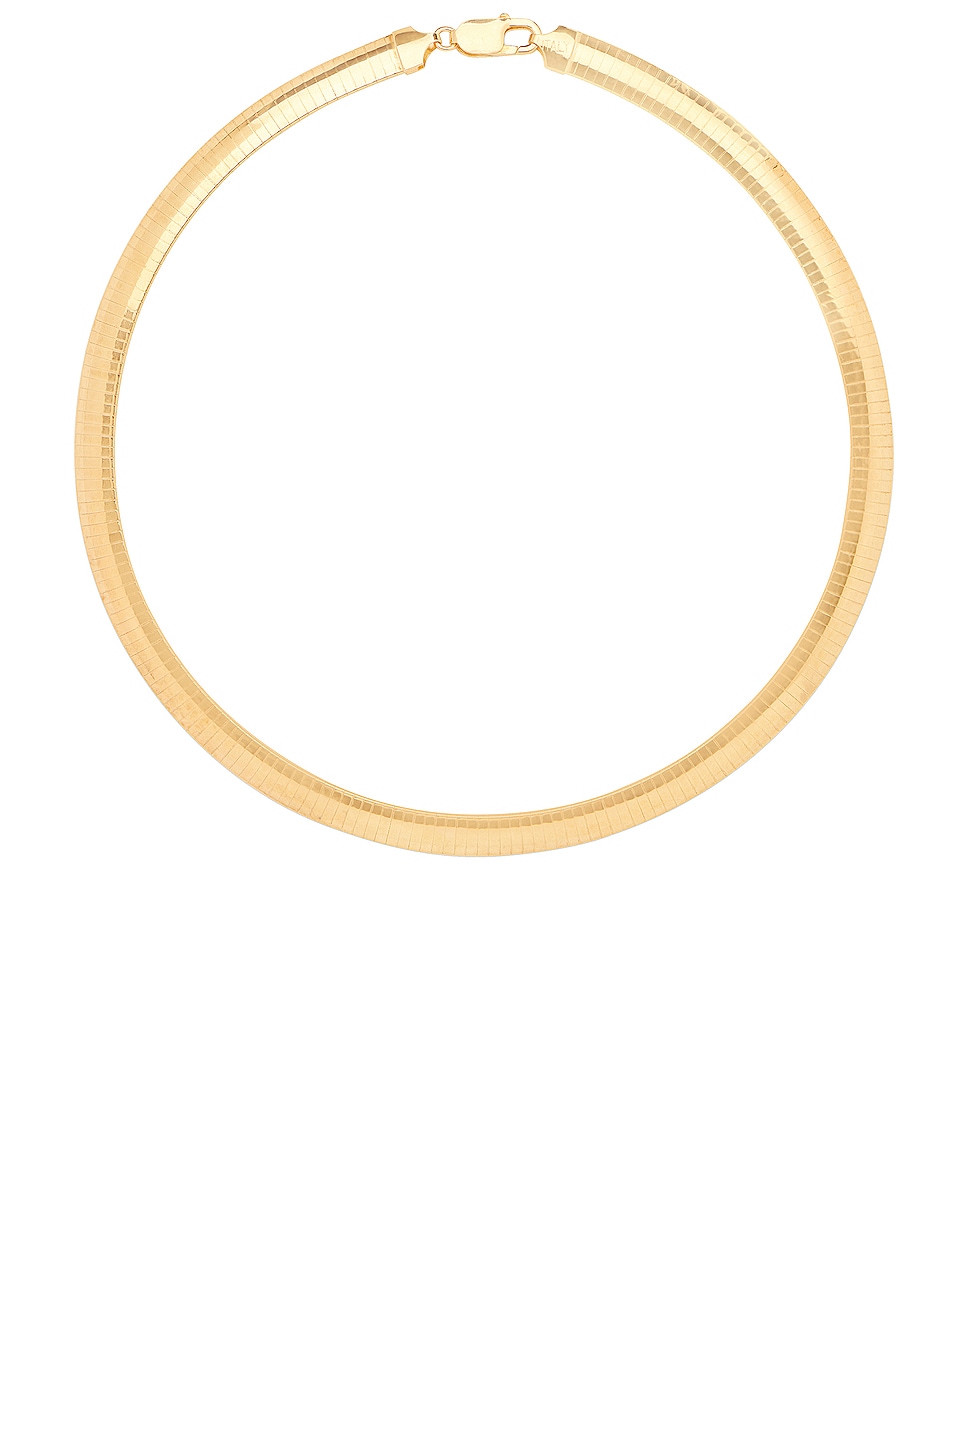 Image 1 of MEGA Omega 8 Necklace in 14k Yellow Gold Plated